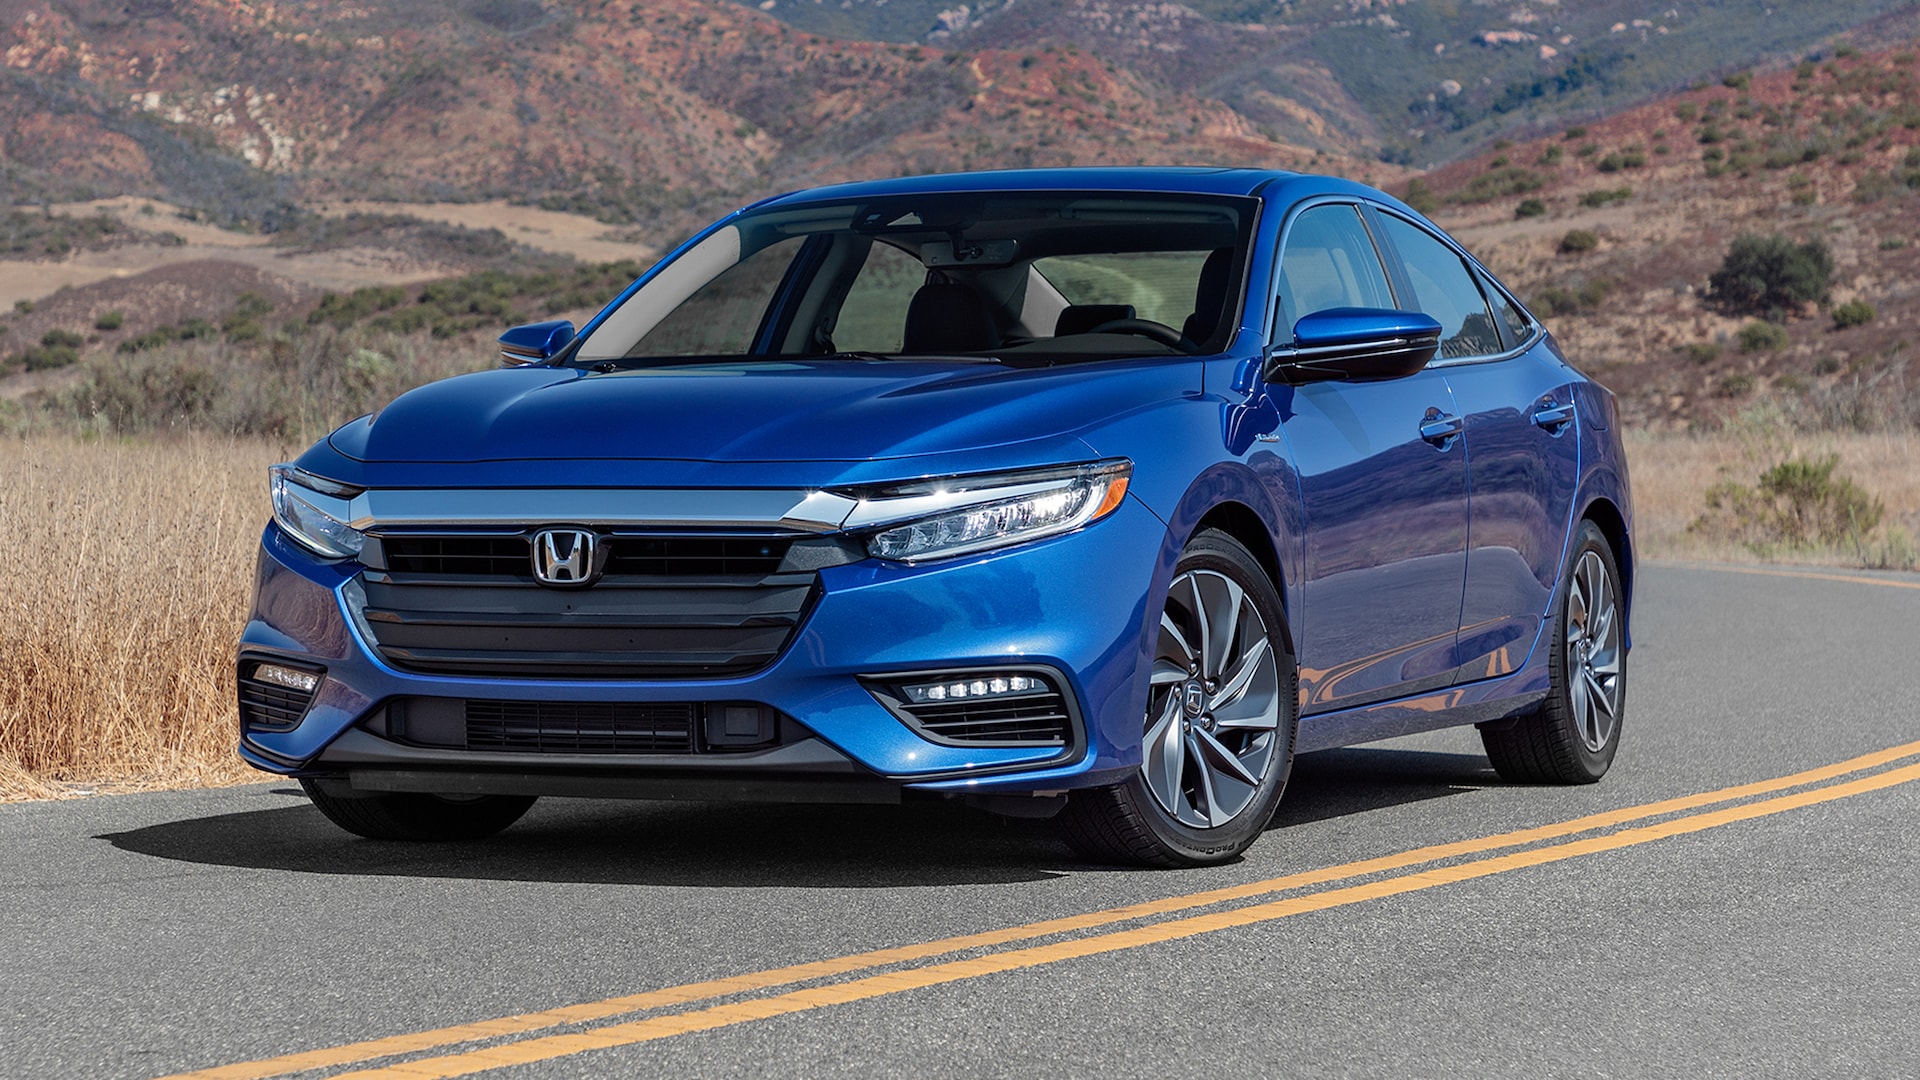 2019 Honda Insight Review: 6 Things to Know